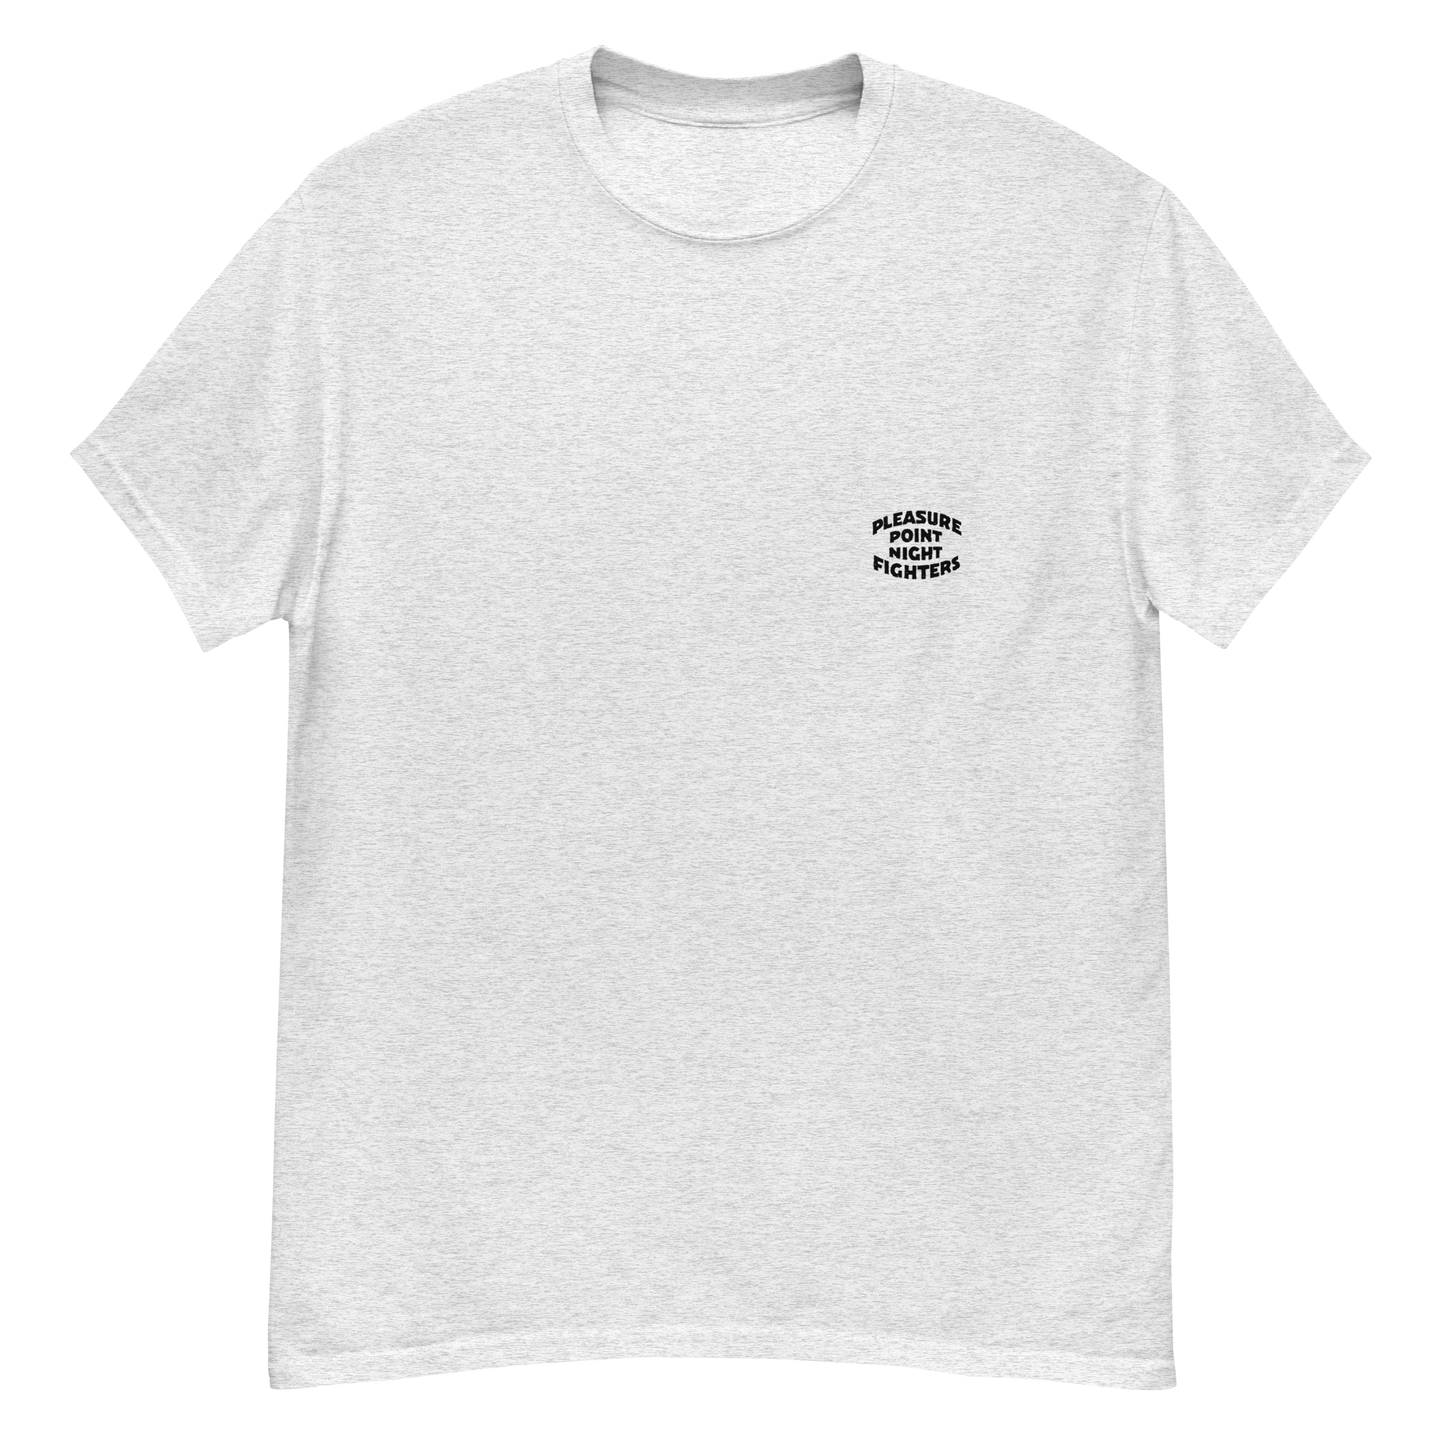 Pack Your Trash © - Classic Can BACK with Pleasure Point - PPNF FRONT - Men's classic tee